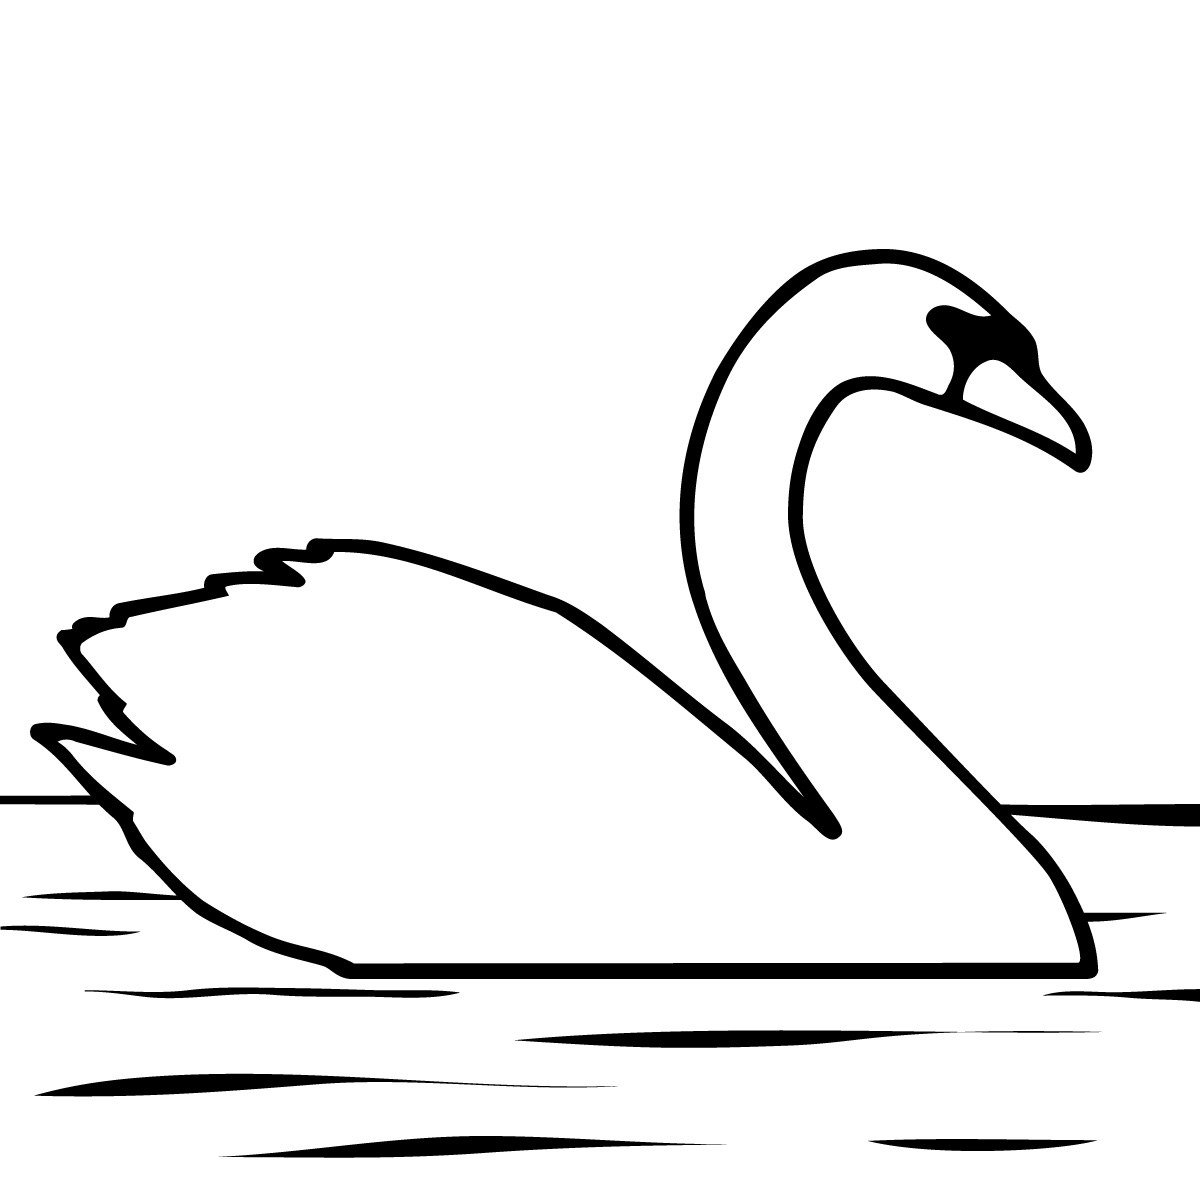 goose clipart black and white - photo #30